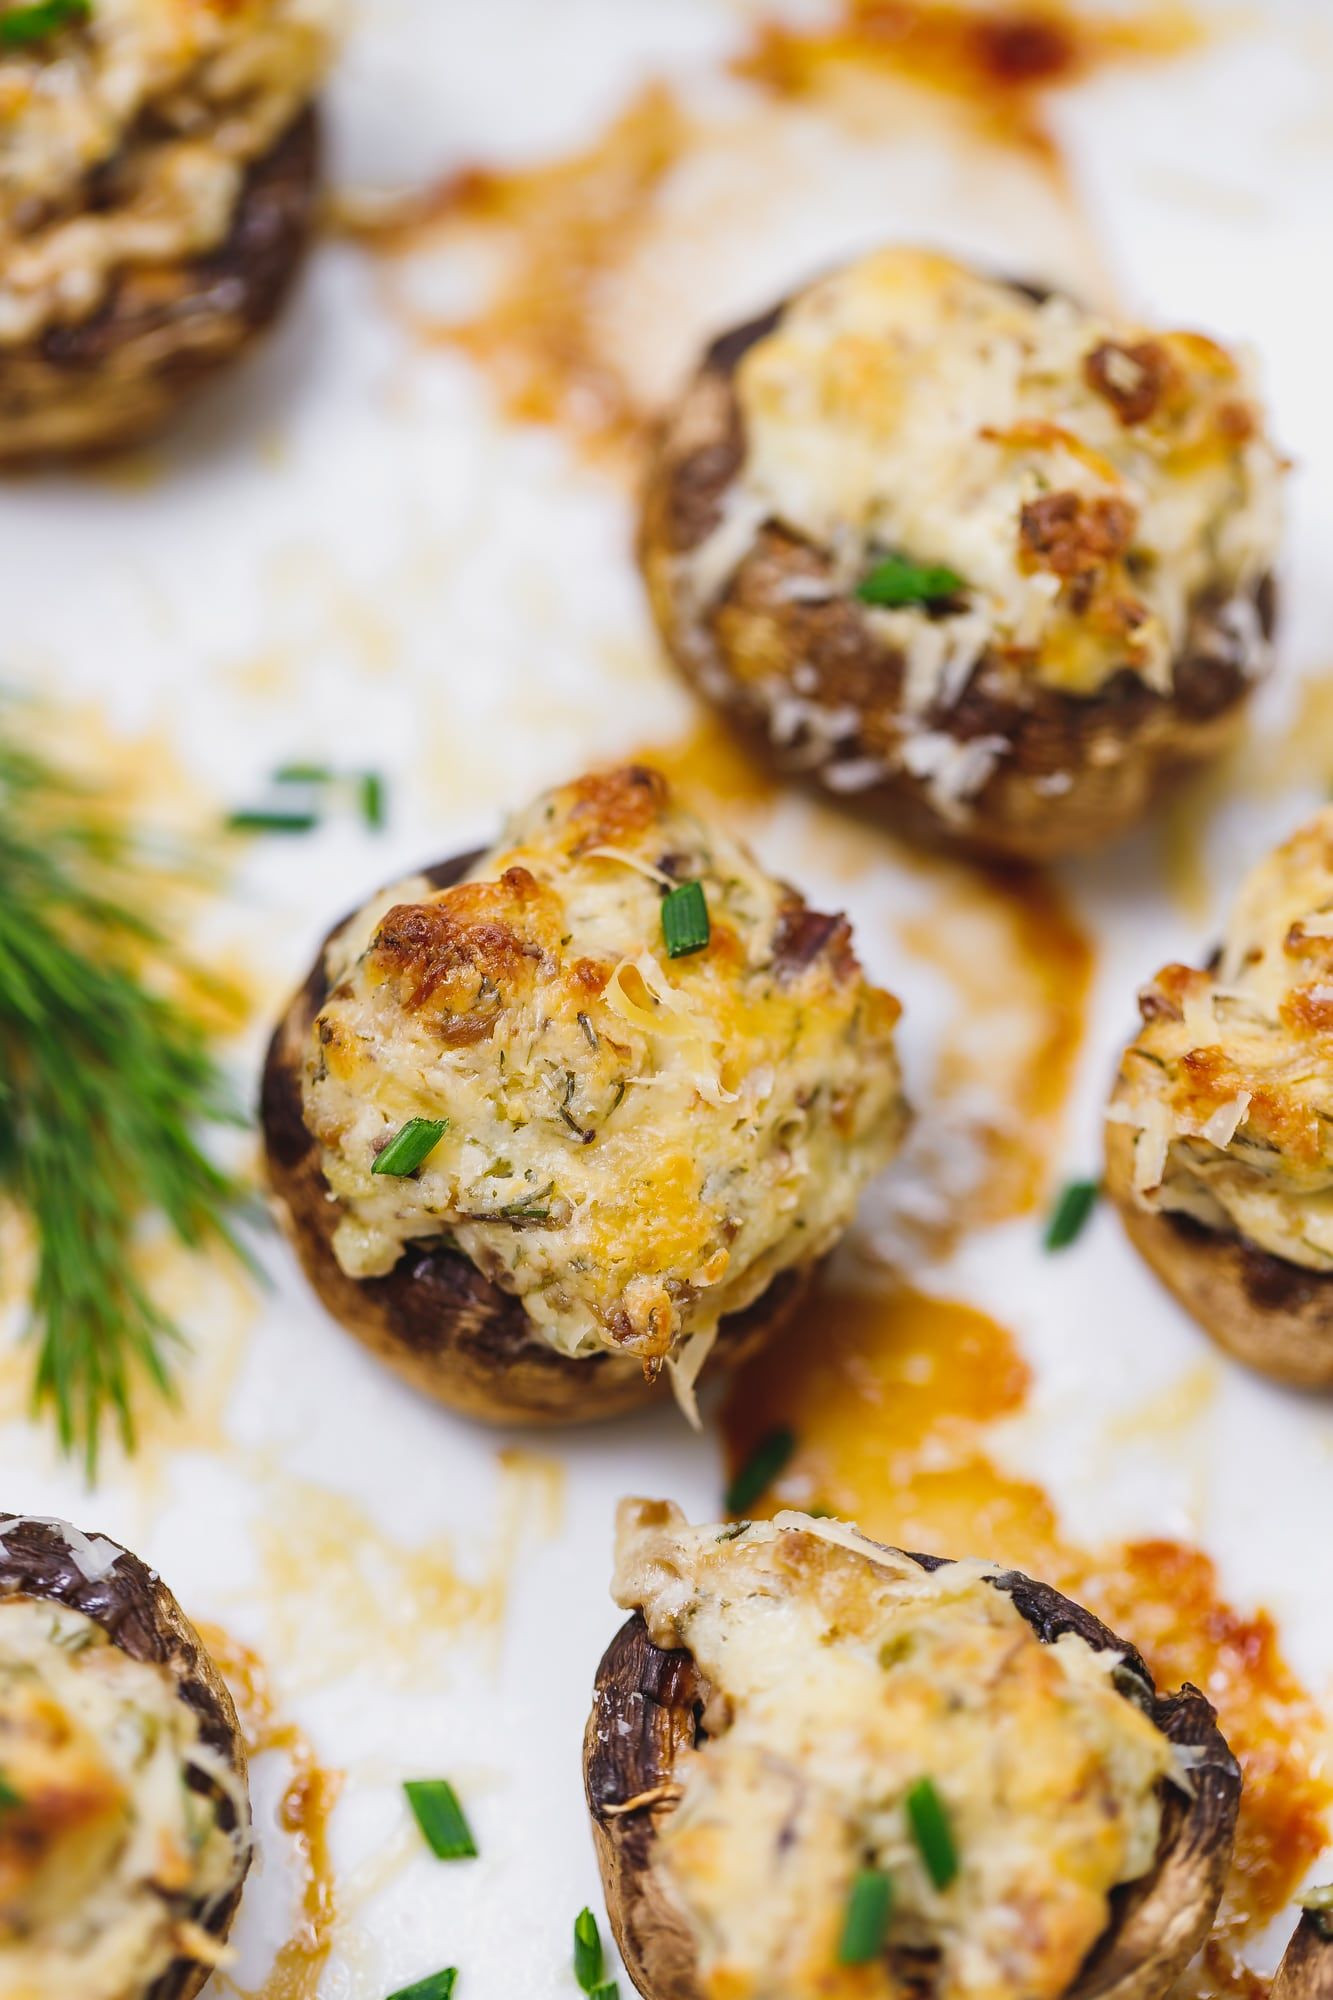 Quick And Easy Mushroom Recipes
 The Best Stuffed Mushrooms Recipe quick and easy to make